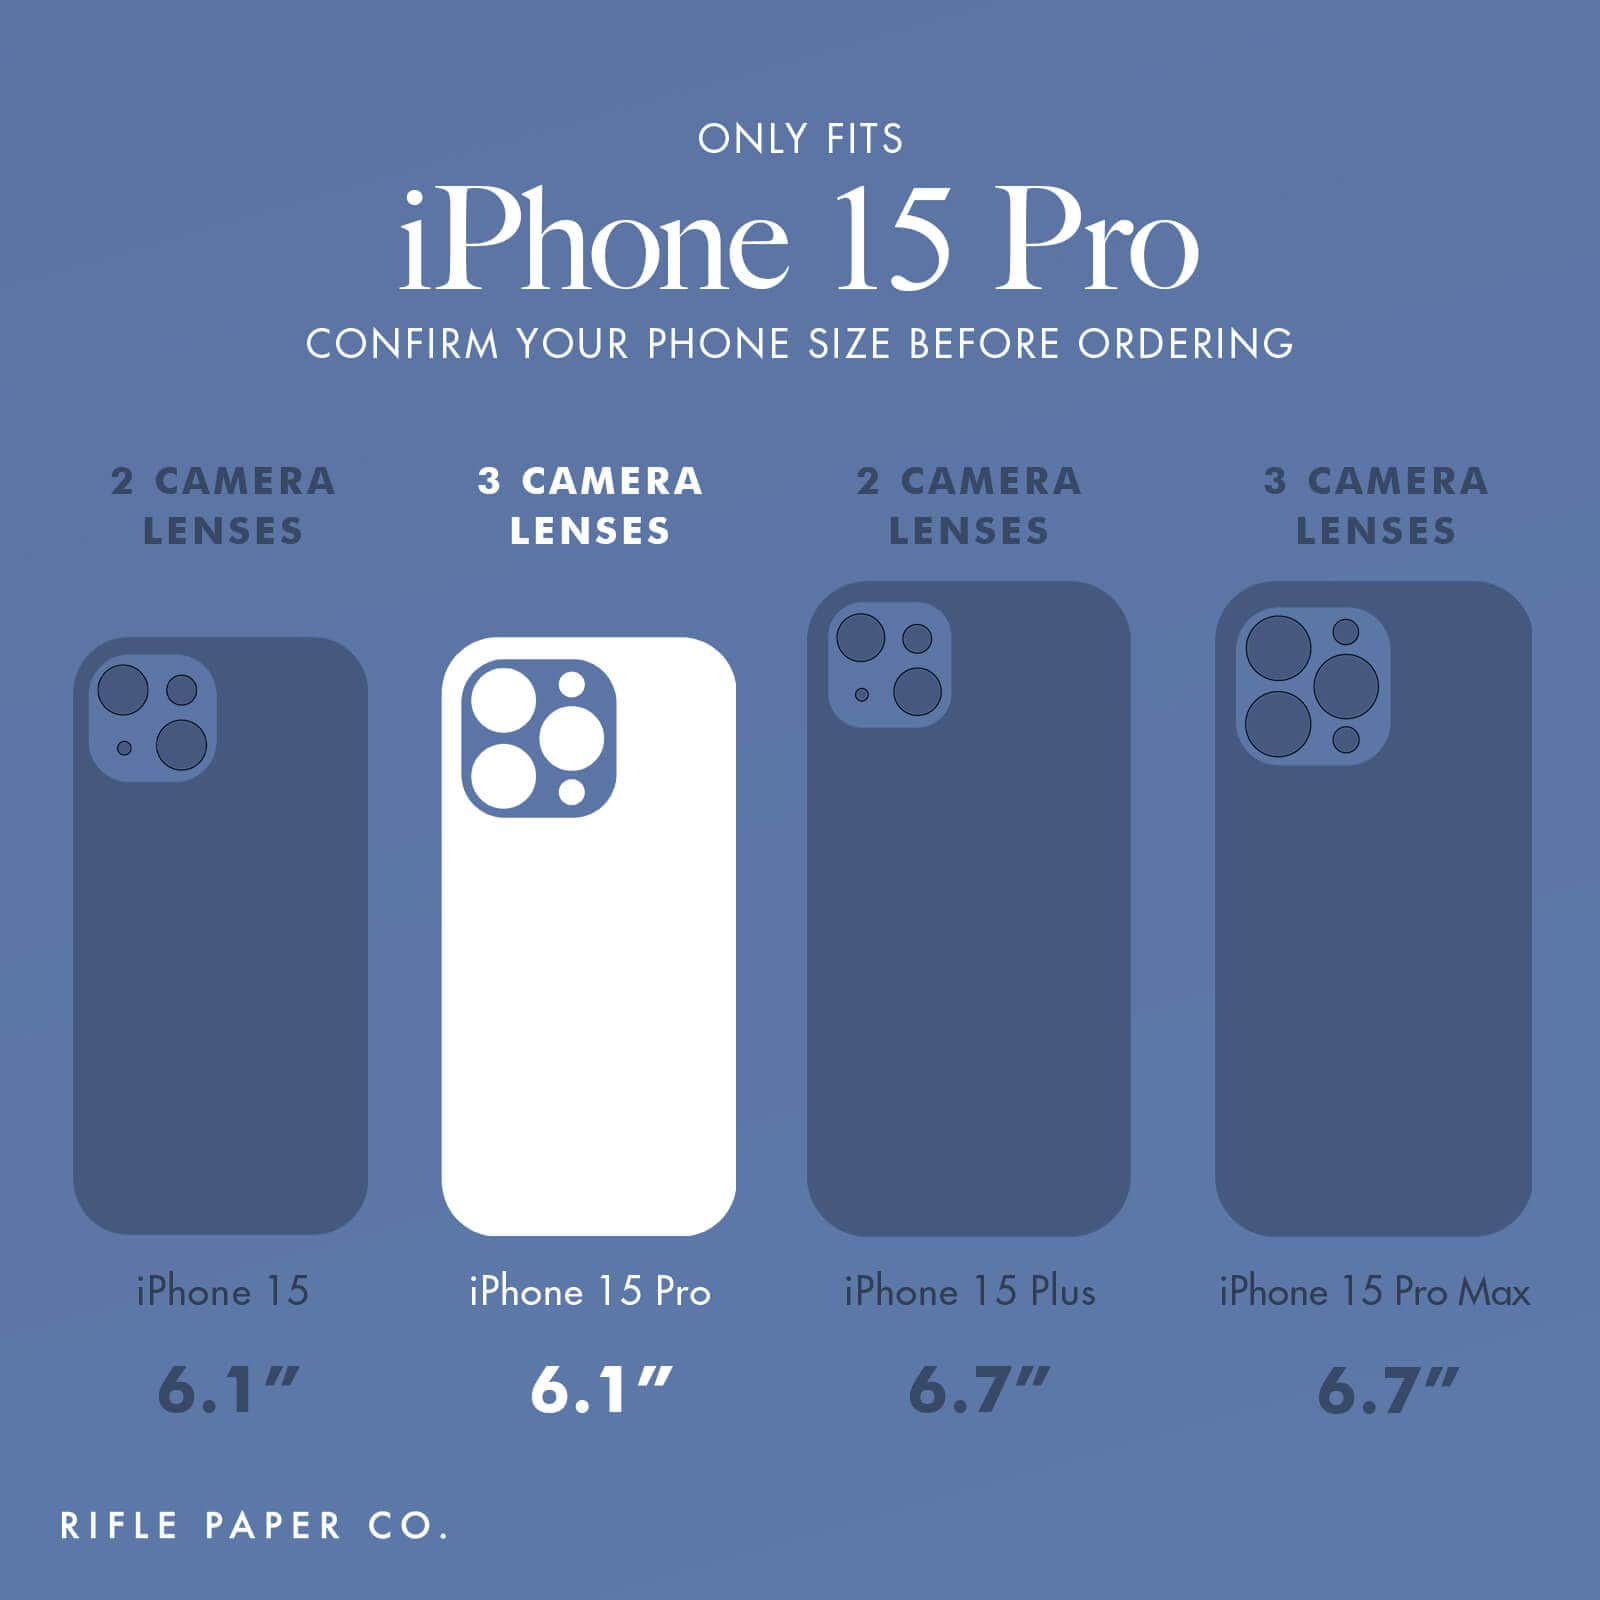 ONLY FITS IPHONE 15 PRO. CONFIRM YOUR PHONE SIZE BEFORE ORDERING. 